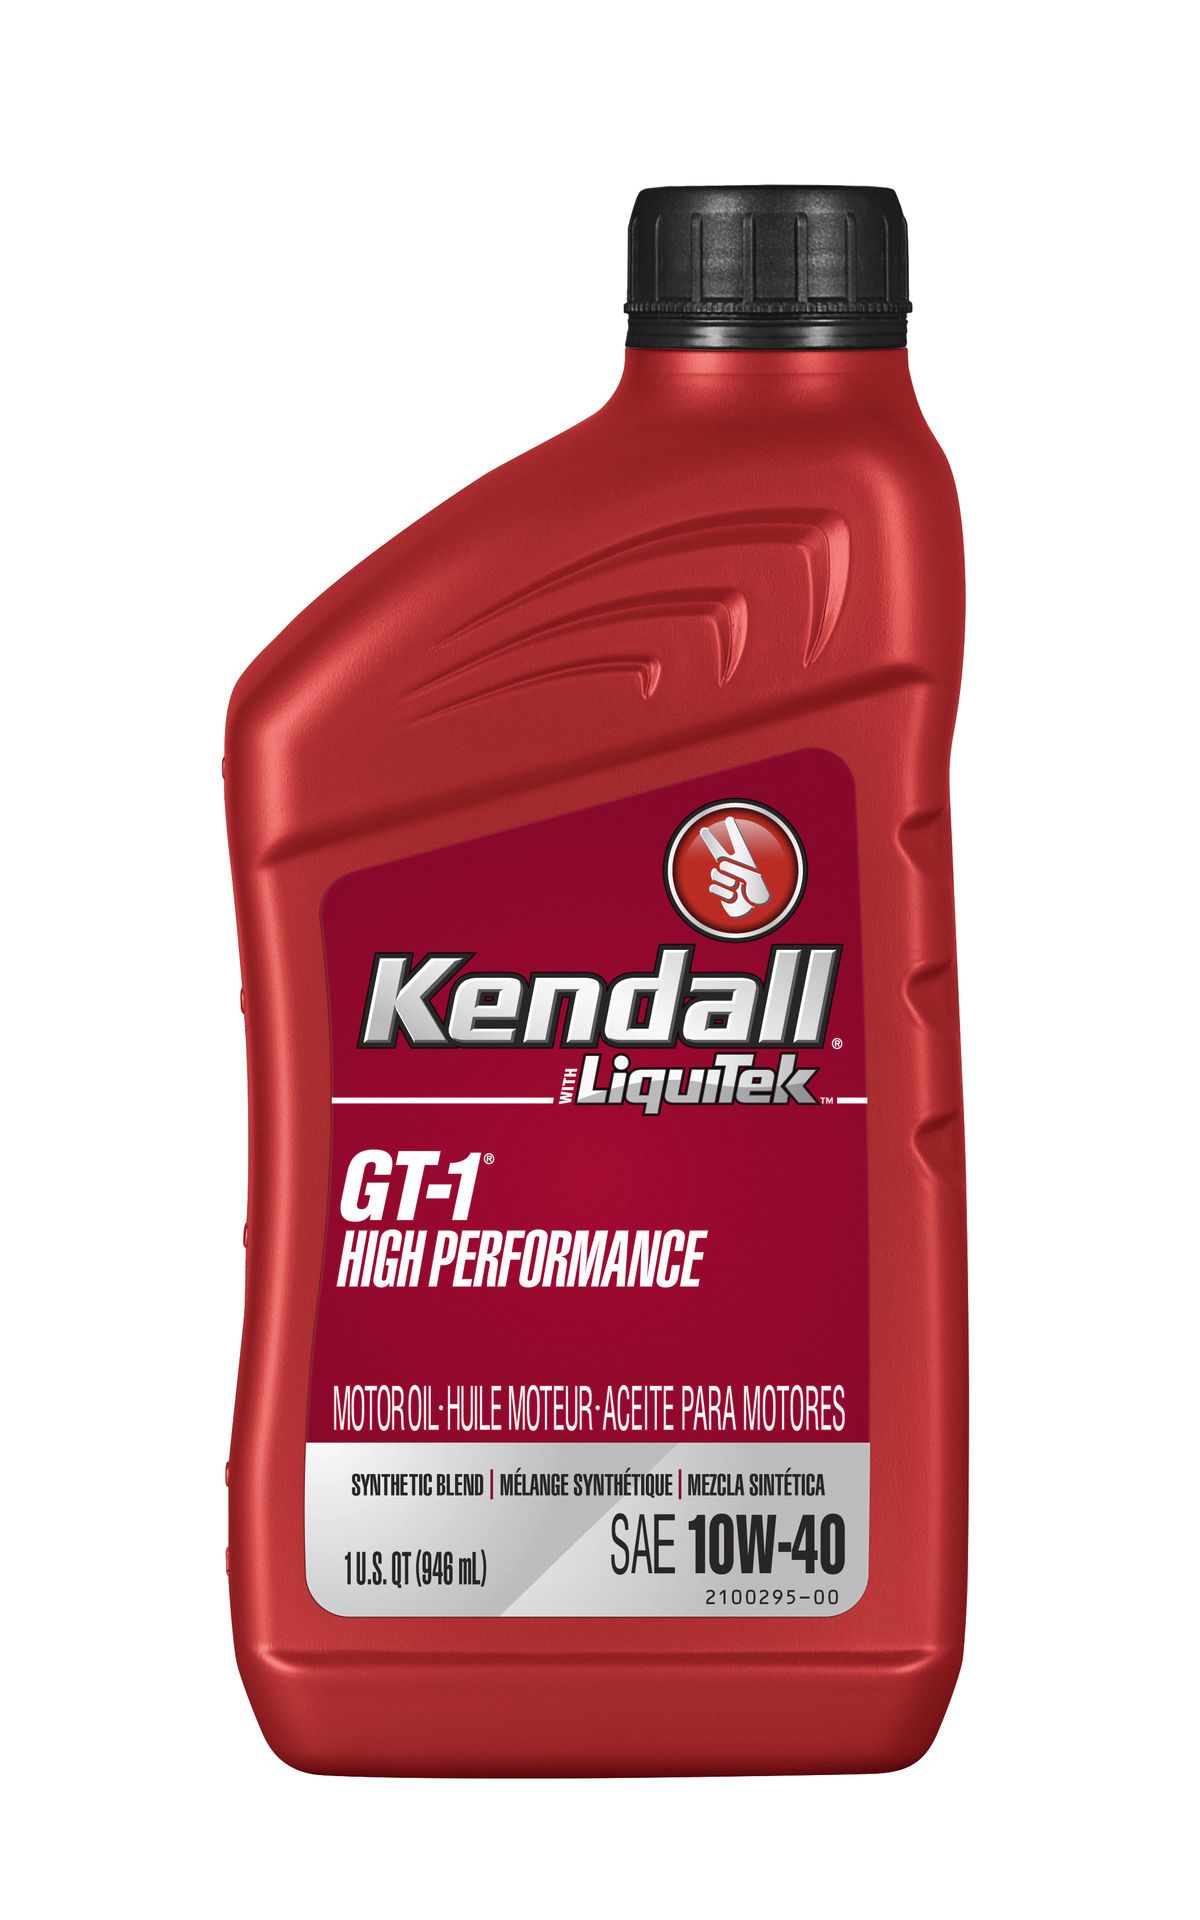 Kendall High Performance 10W40 - Buy online at Yoder Oil Co., Inc.